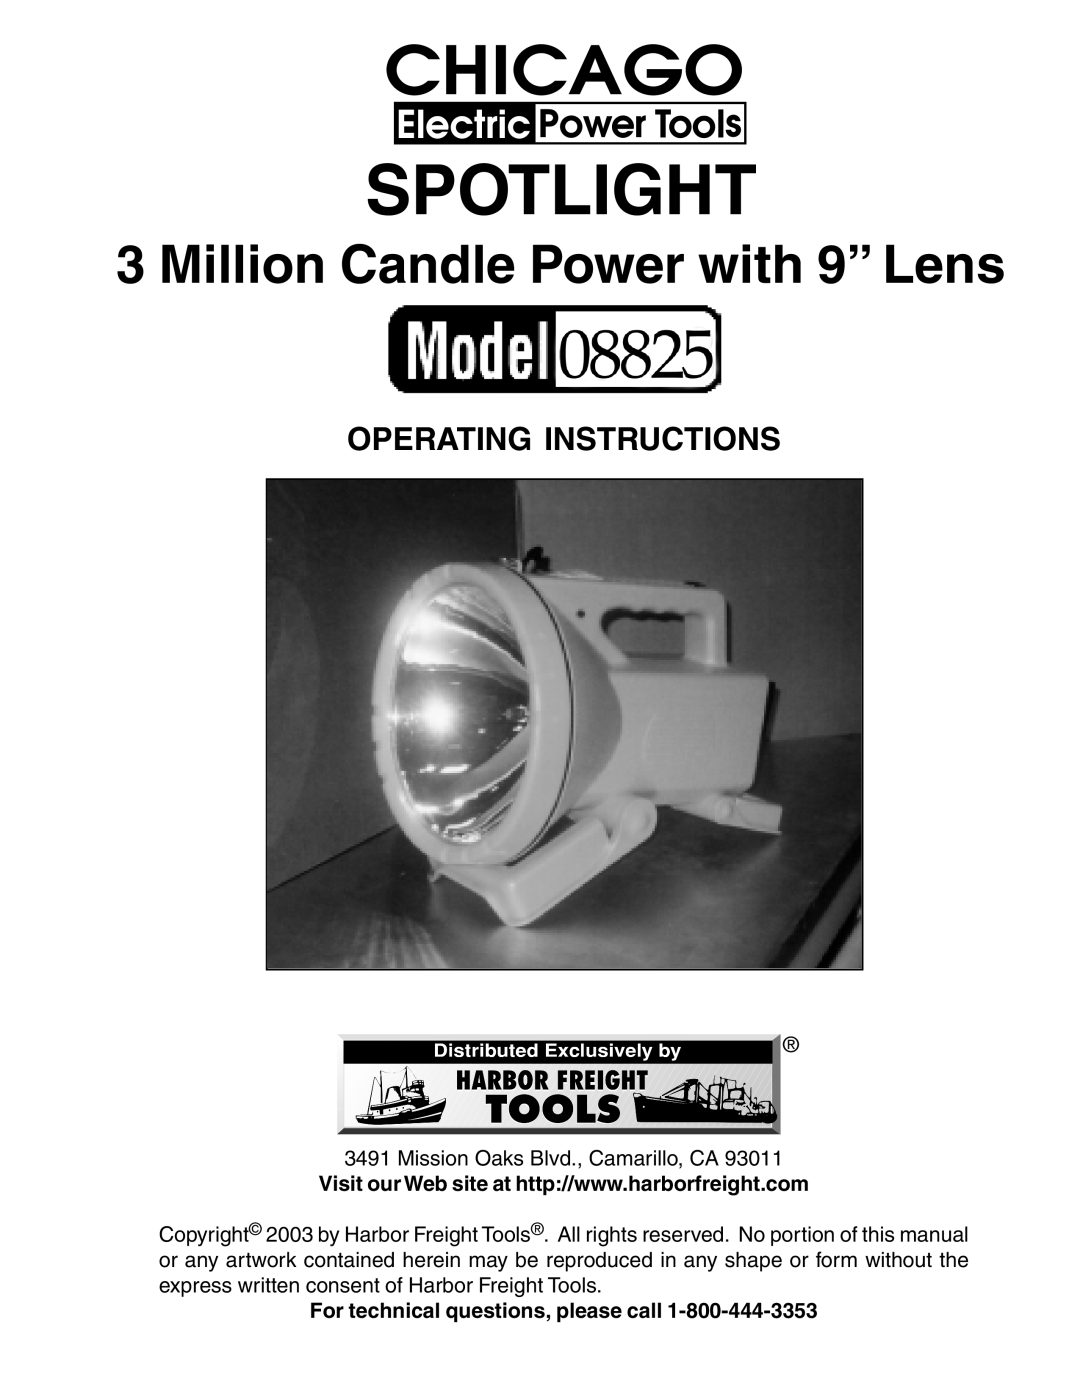 Harbor Freight Tools 08825 manual For technical questions, please call, Spotlight, Million Candle Power with 9” Lens 